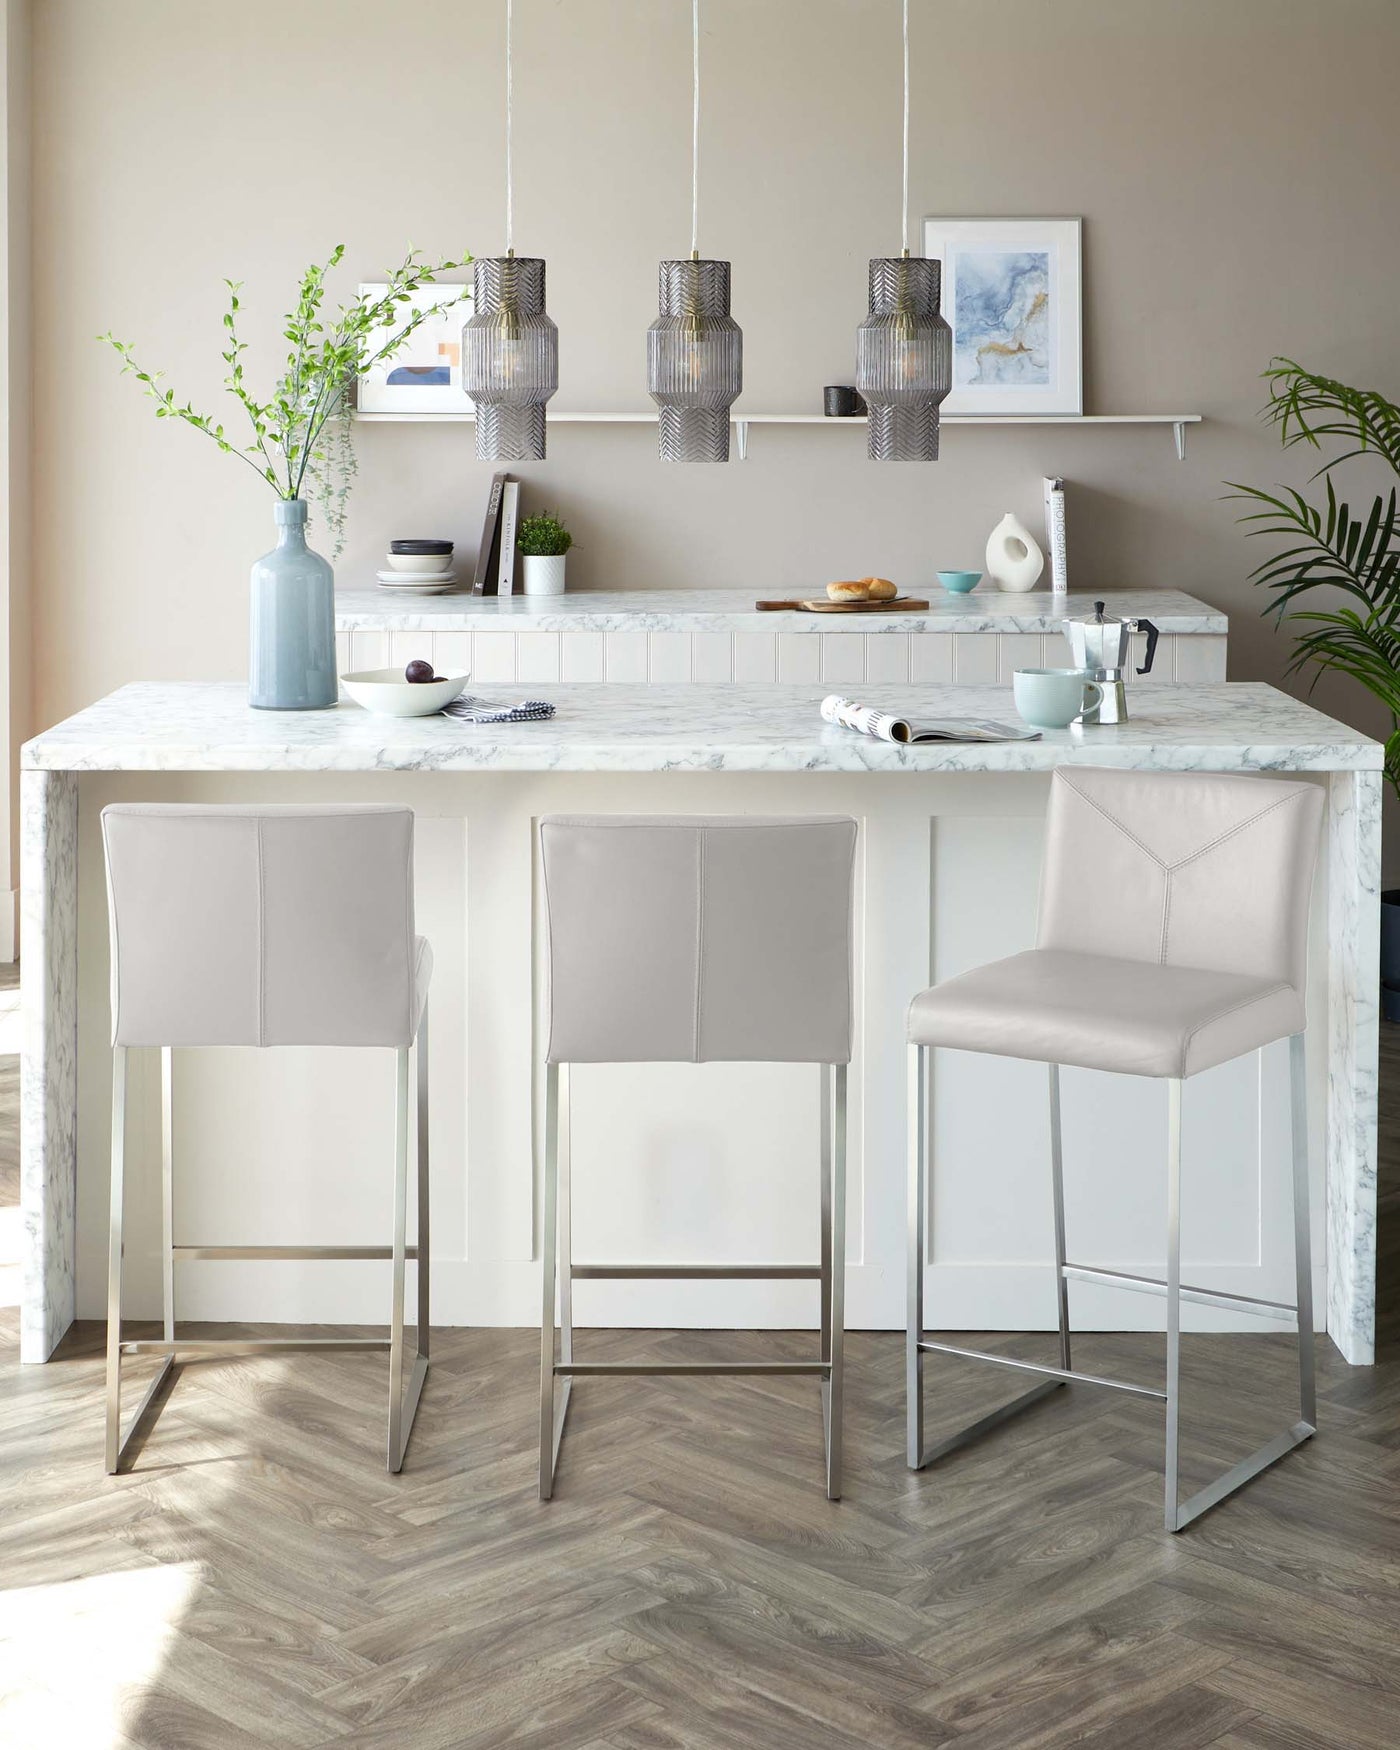 Monti White Real Leather Bar Stool